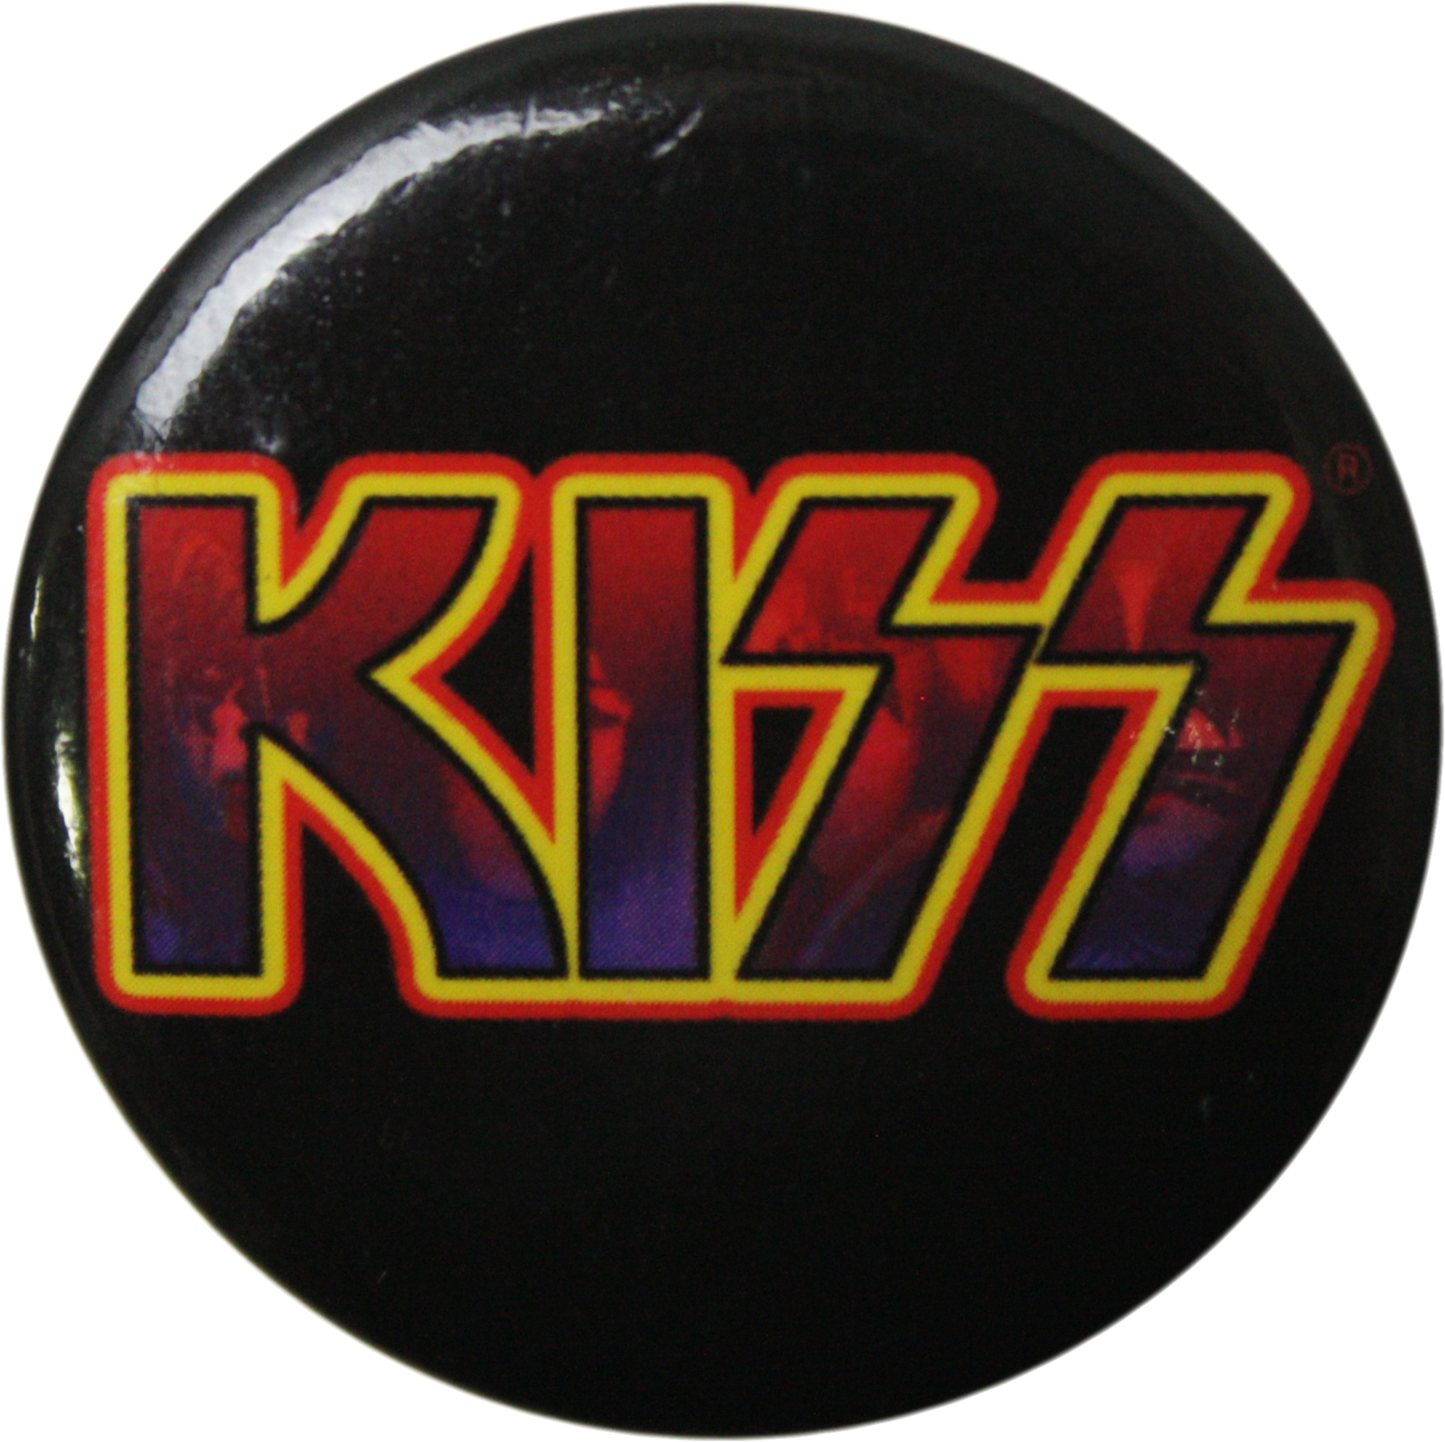 KISS - Logo on Black - 1.25 inch Pin-on Button